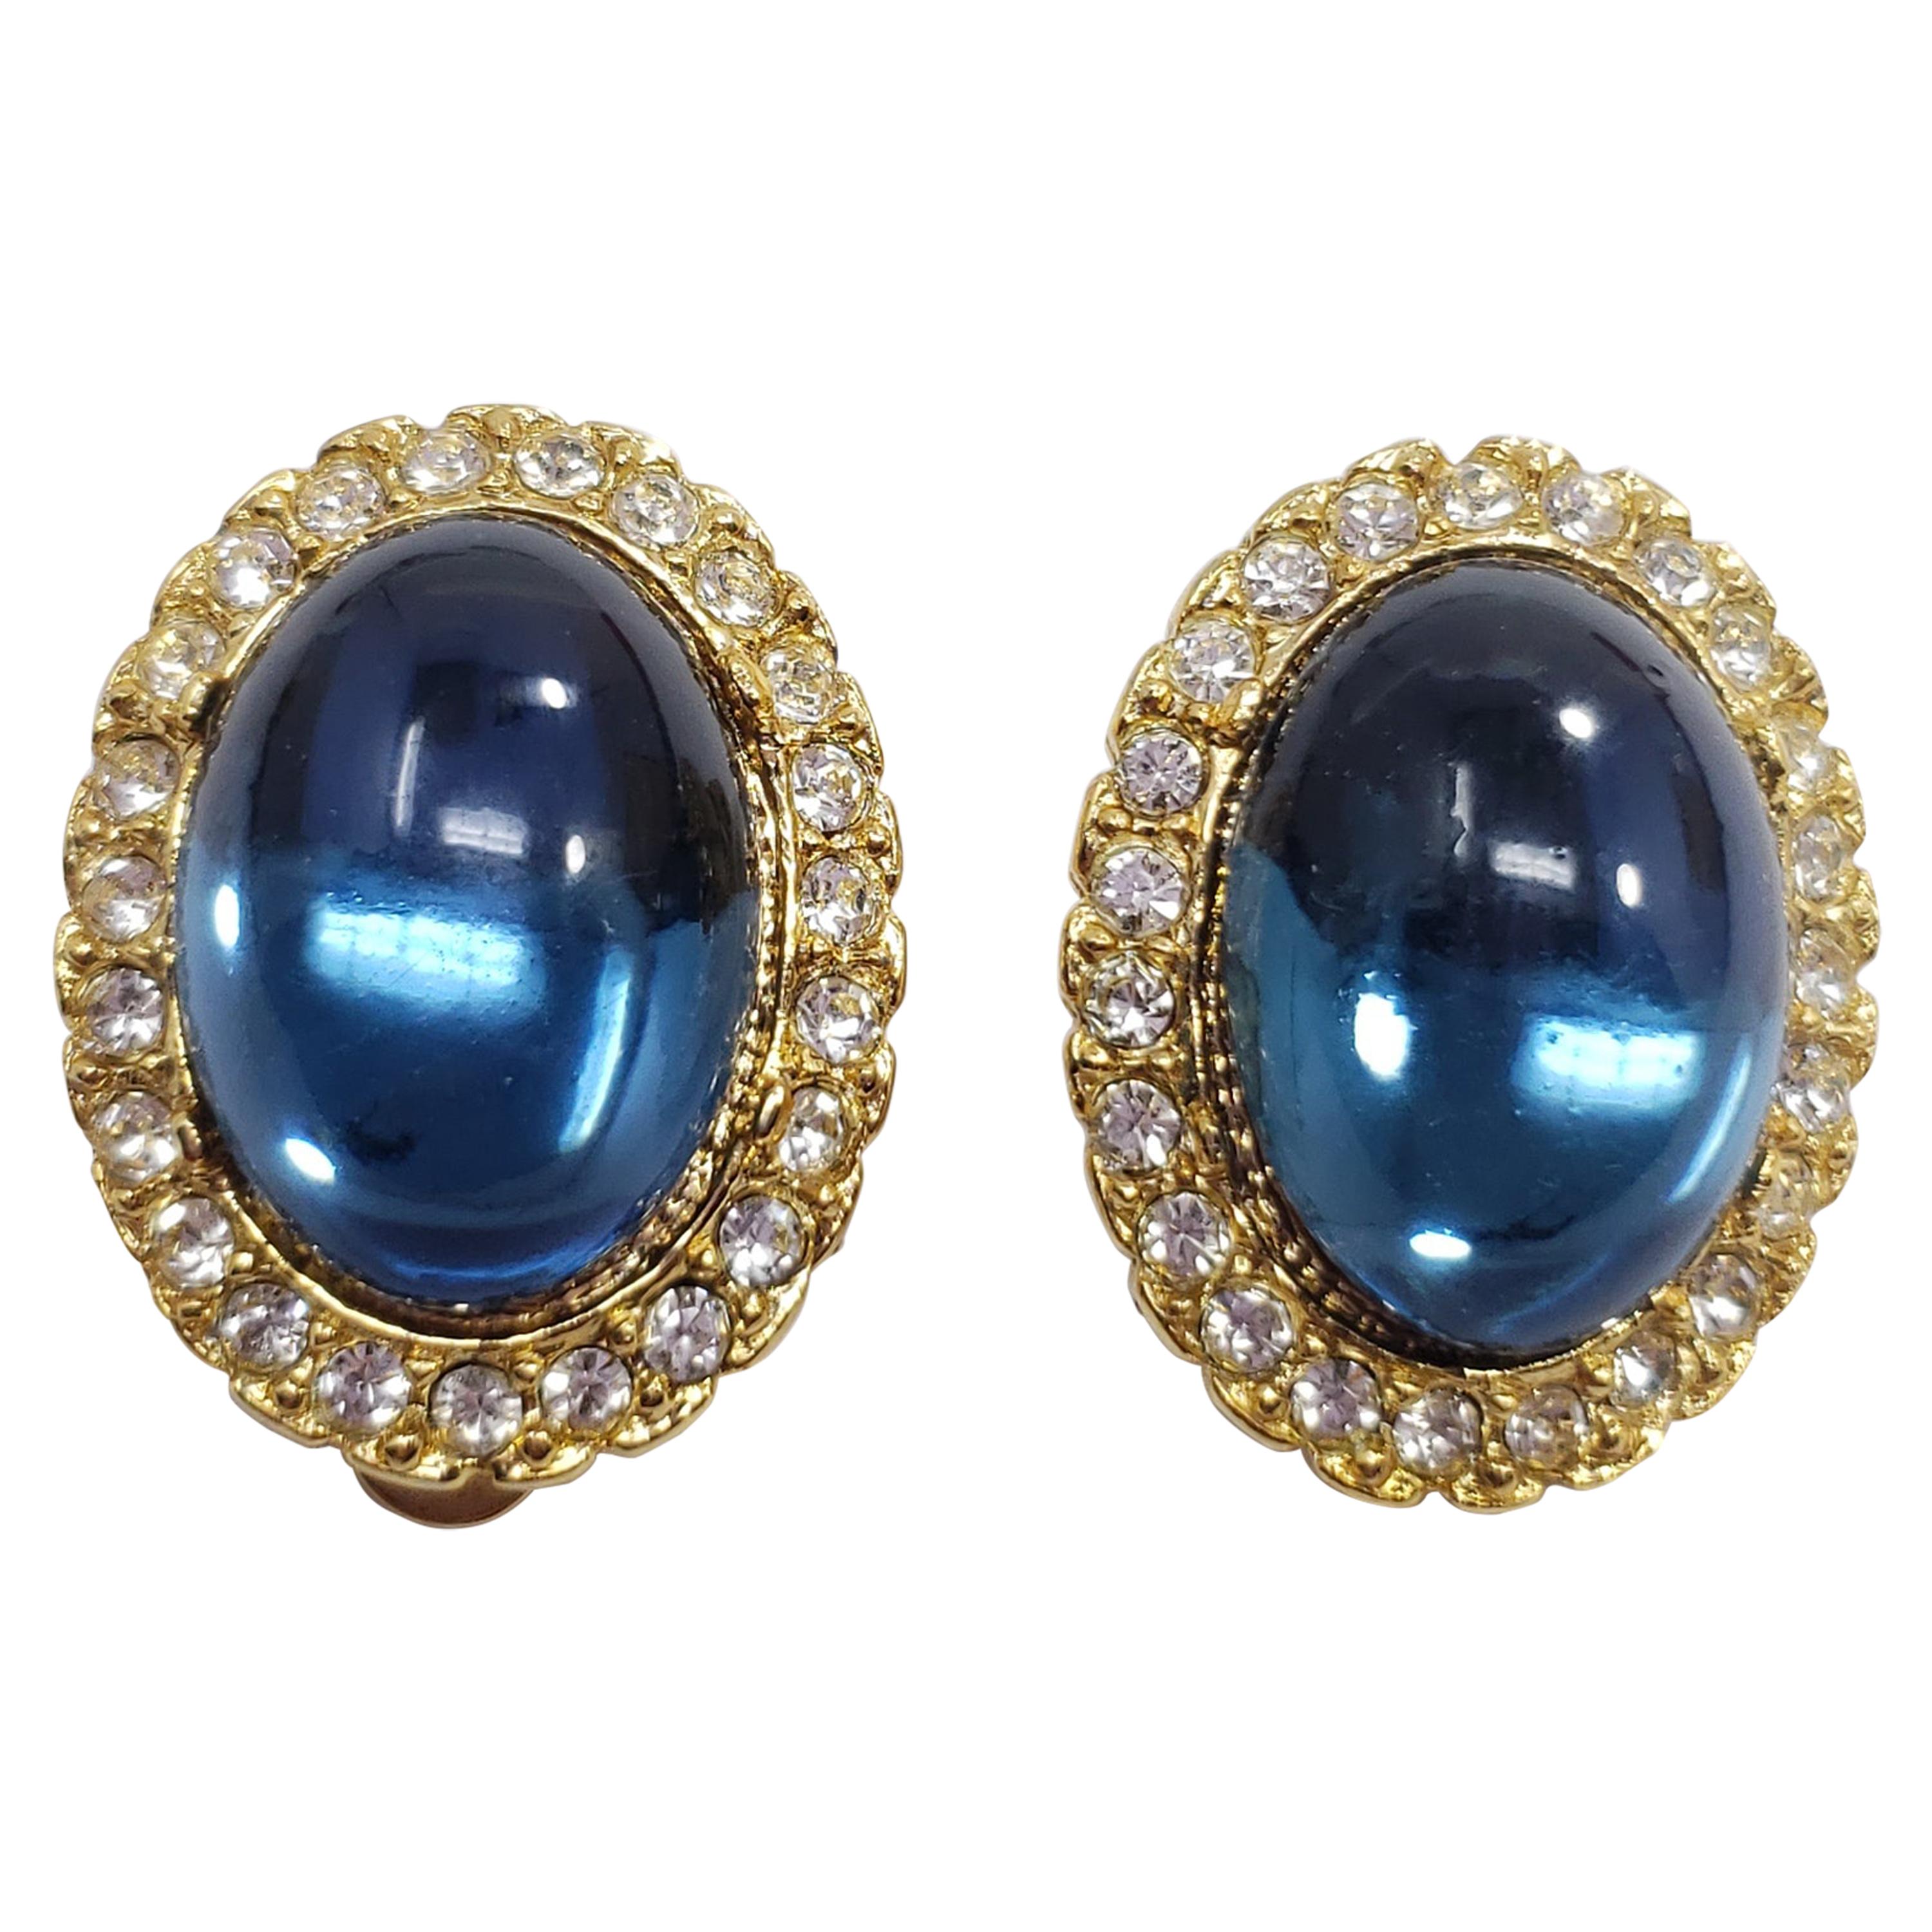 Vintage Cabochon Clip On Earrings In Gold, Sapphire and Clear Crystals